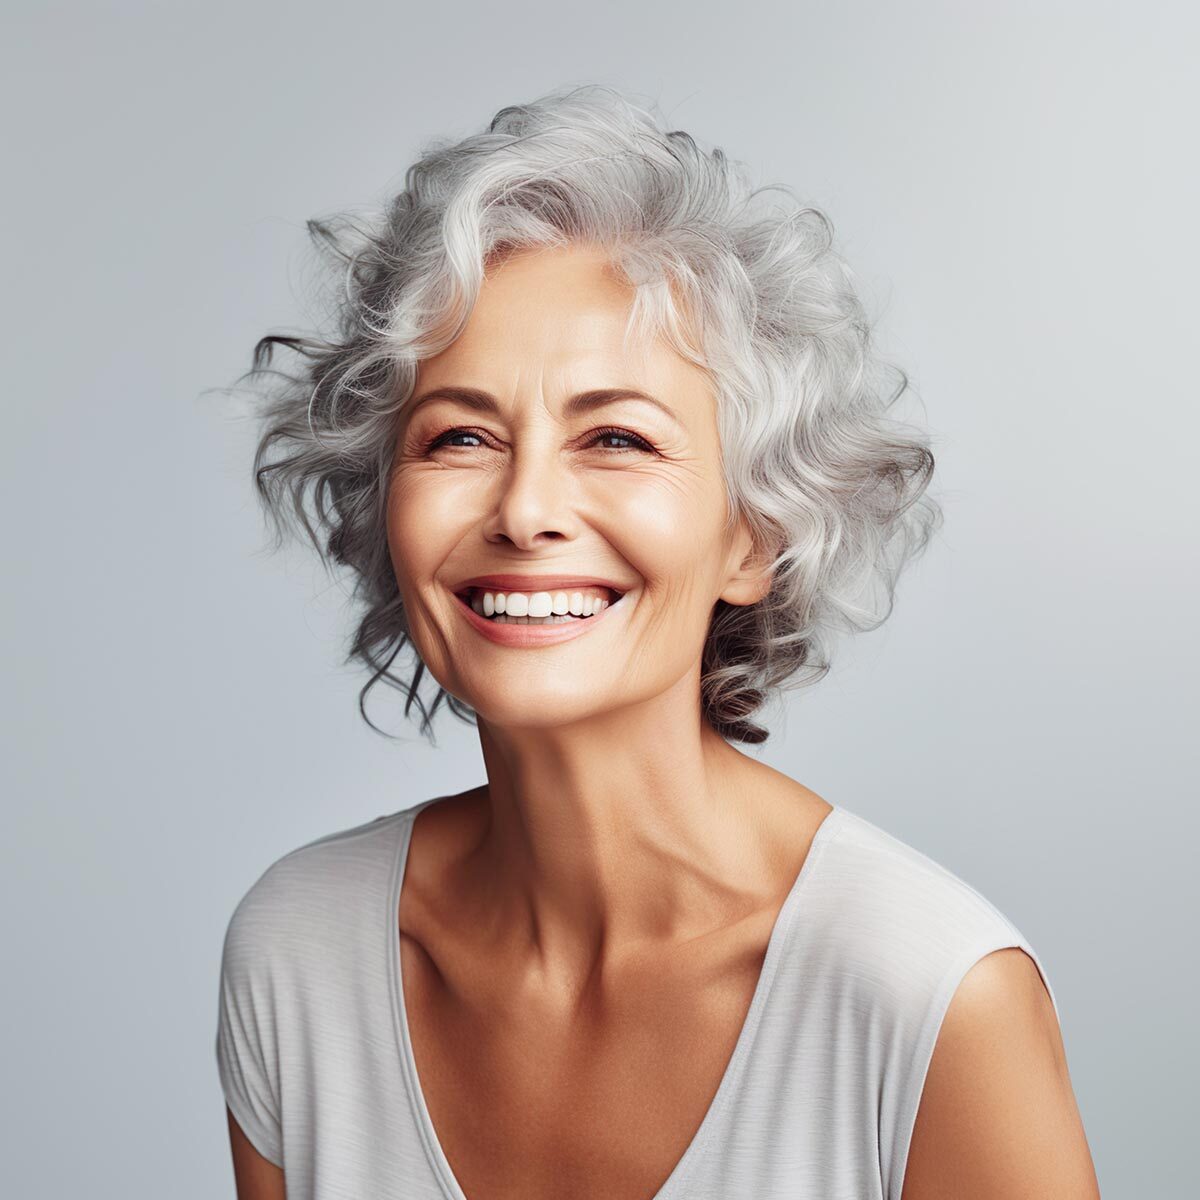 Senior woman with curly gray hair and a radiant smile, wearing a white top.